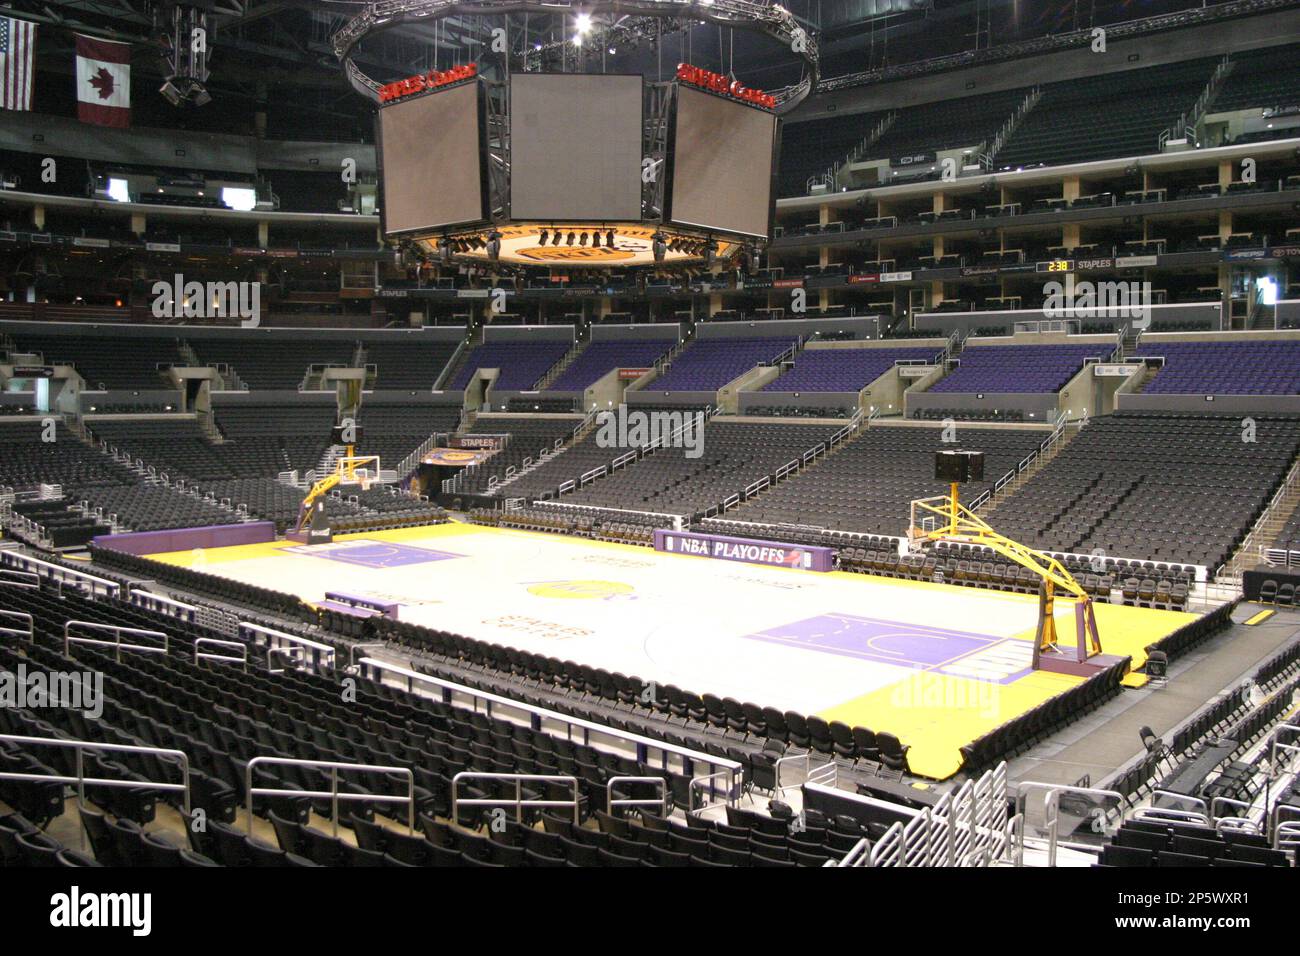 Staples Center, home of Lakers, Clippers, Kings and Sparks, to be